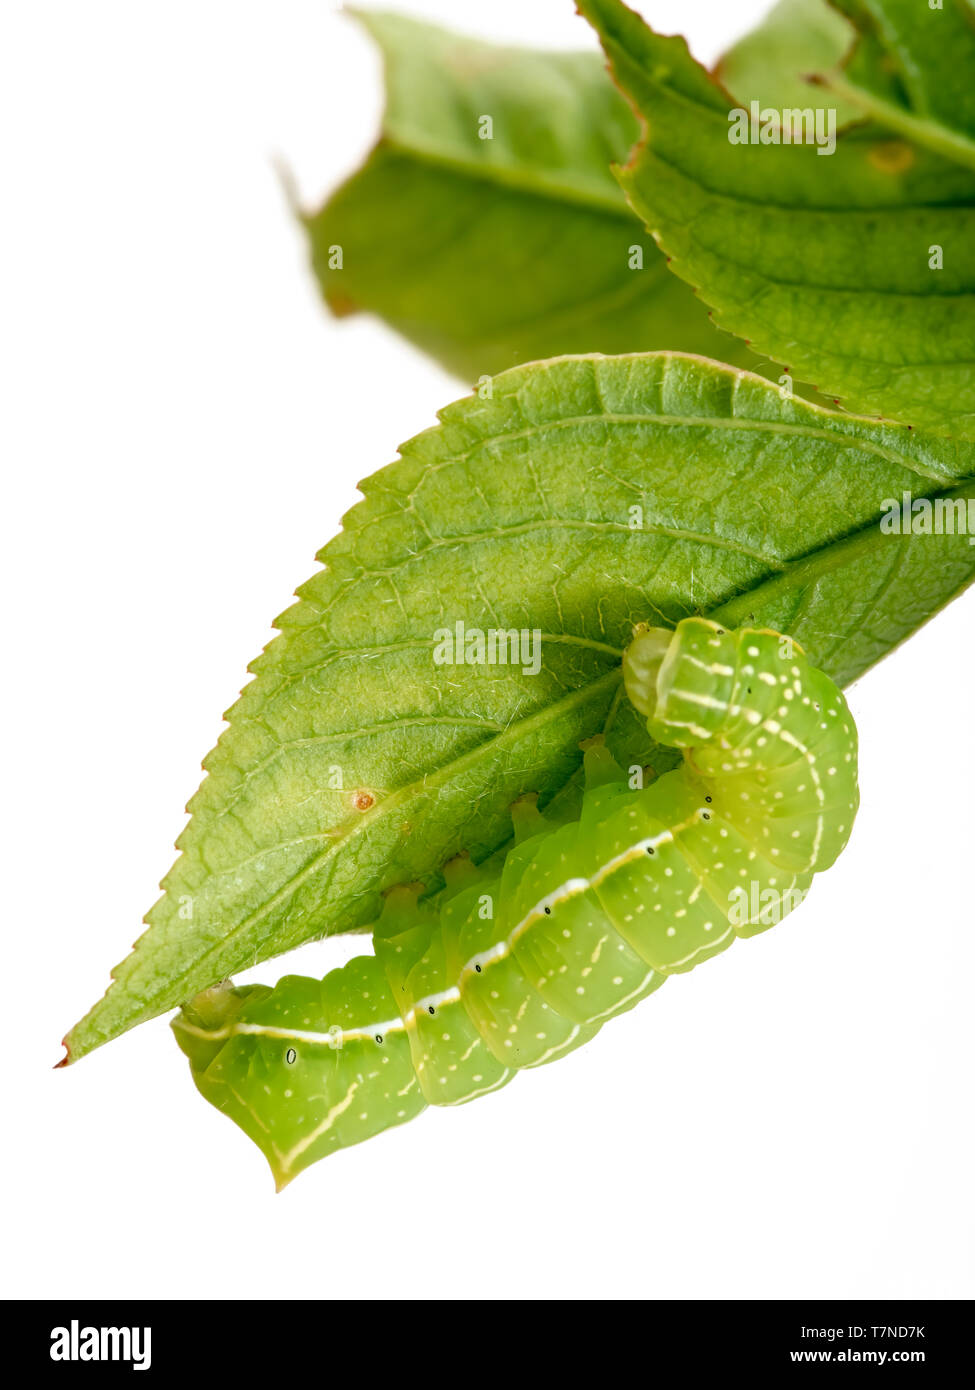 Green caterpillar with yellow, white and black markings. Amphipyra pyramidoides, Copper Underwing Moth larva, early instar. On leaf, isolated on white Stock Photo